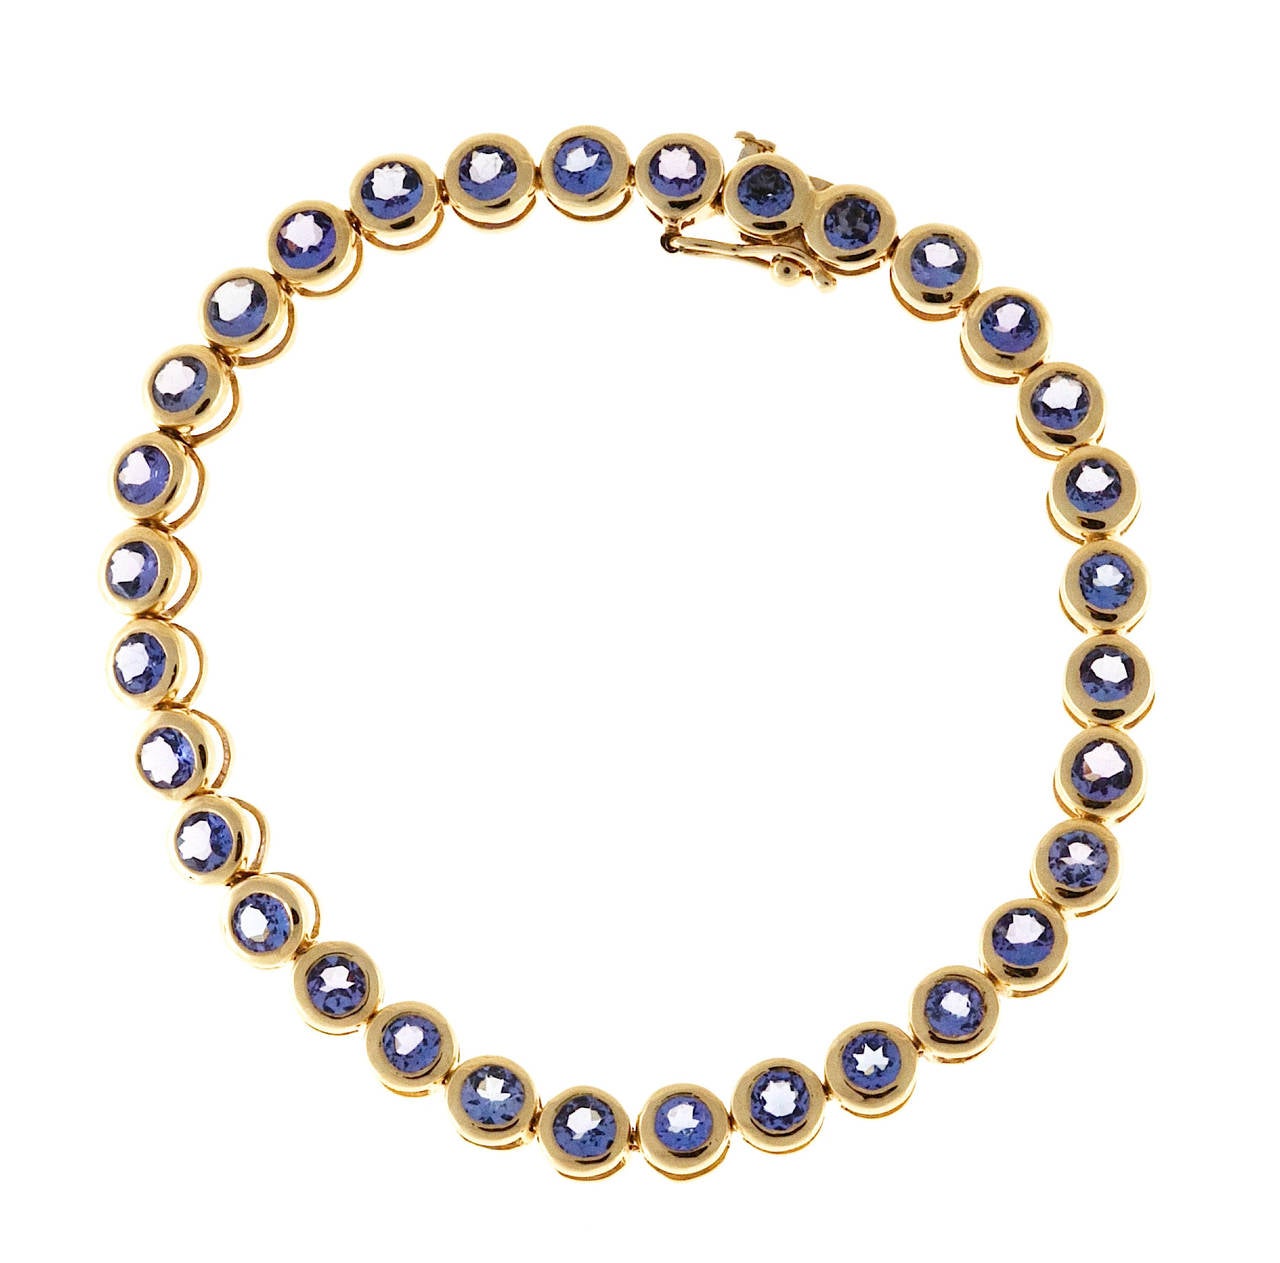 Bezel set 14k gold STS bracelet with 32 medium bright blue Tanzanite approx. 4.00ct total. Built in hidden catch.

32 3mm round medium purple Tanzanite approx. total weight 4.00ct
14k Yellow Gold
Stamped: 14k STS
10.9 grams
Width: